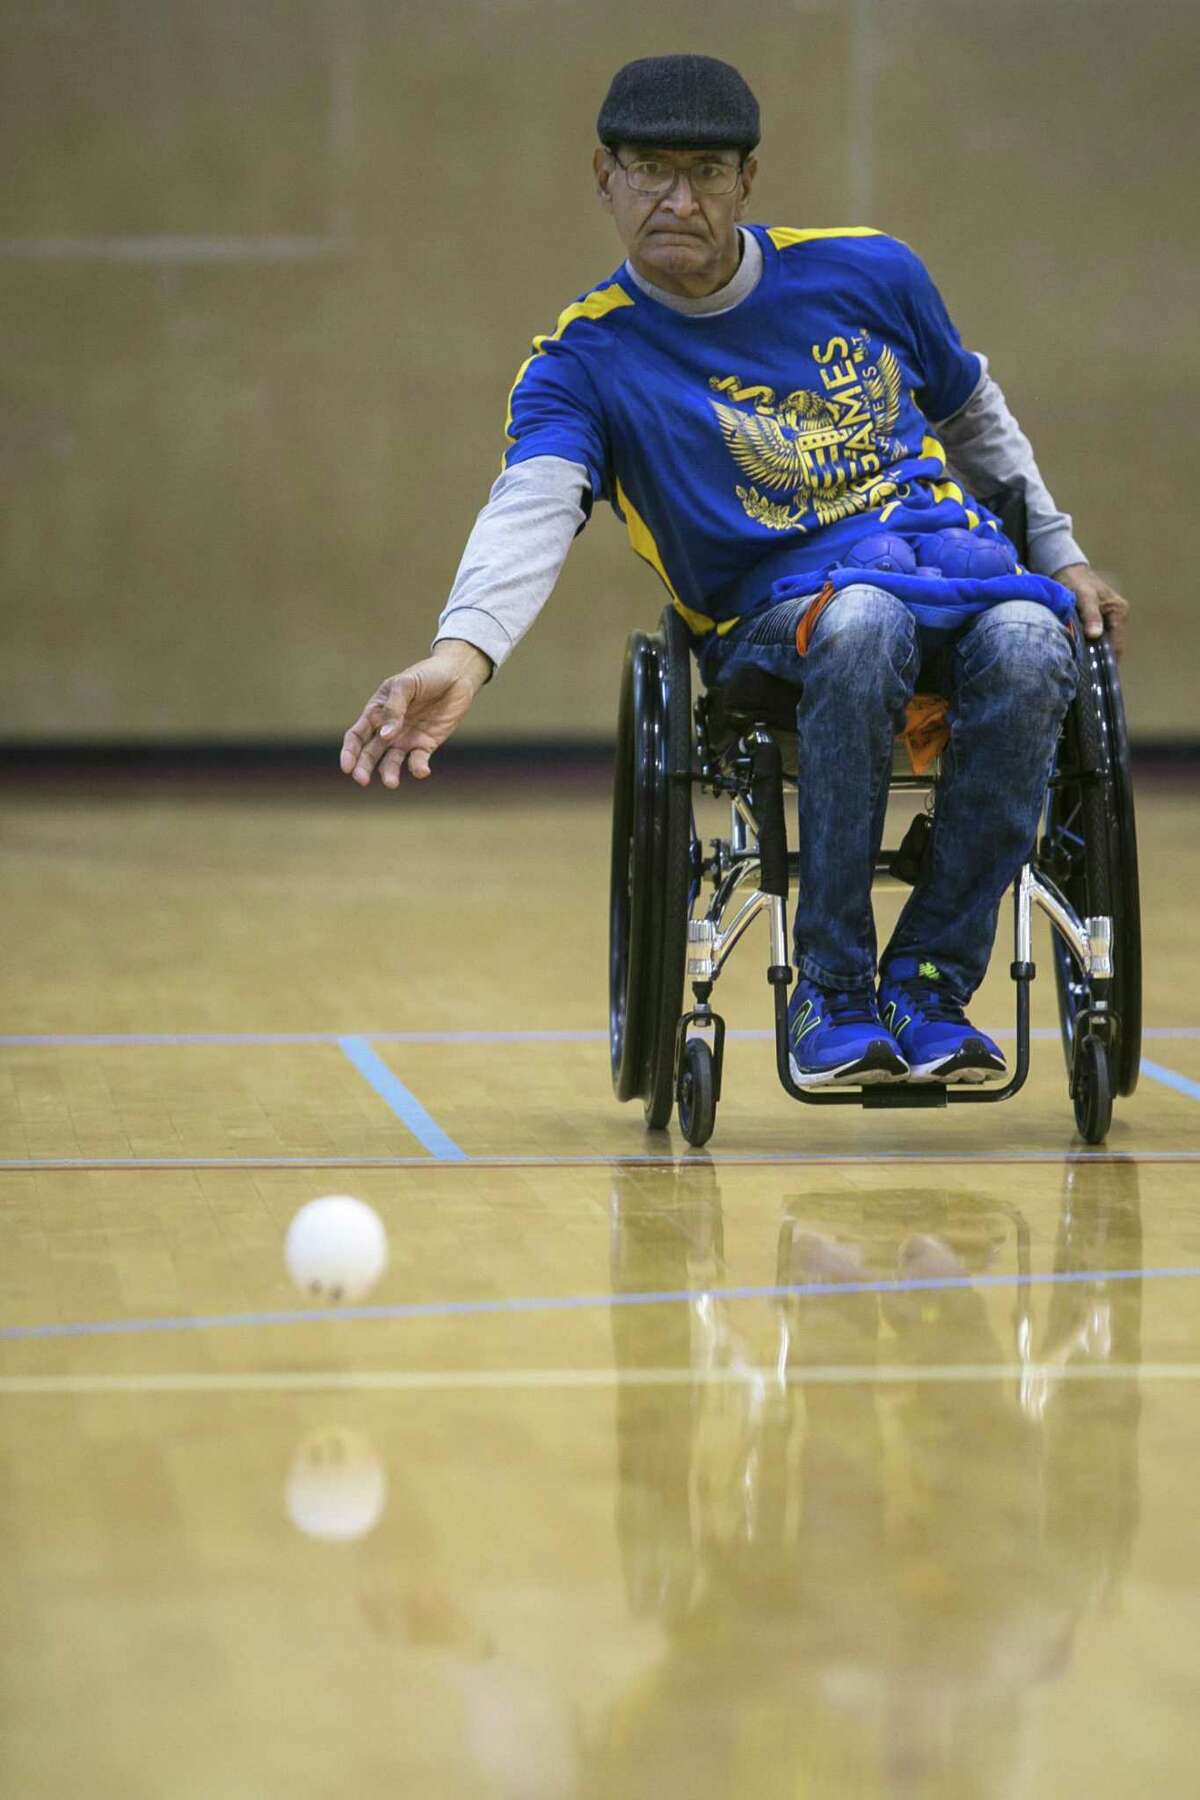 Nook Gustamange tosses his Boccia ball during the Valor Games Southwest held at Mission Concepcion Sports Park in San Antonio Wednesday, Sept. 26, 2018. Veterans and service members with physical disabilities gathered together to compete and celebrate sports as a means of empowering people and strengthening the community.